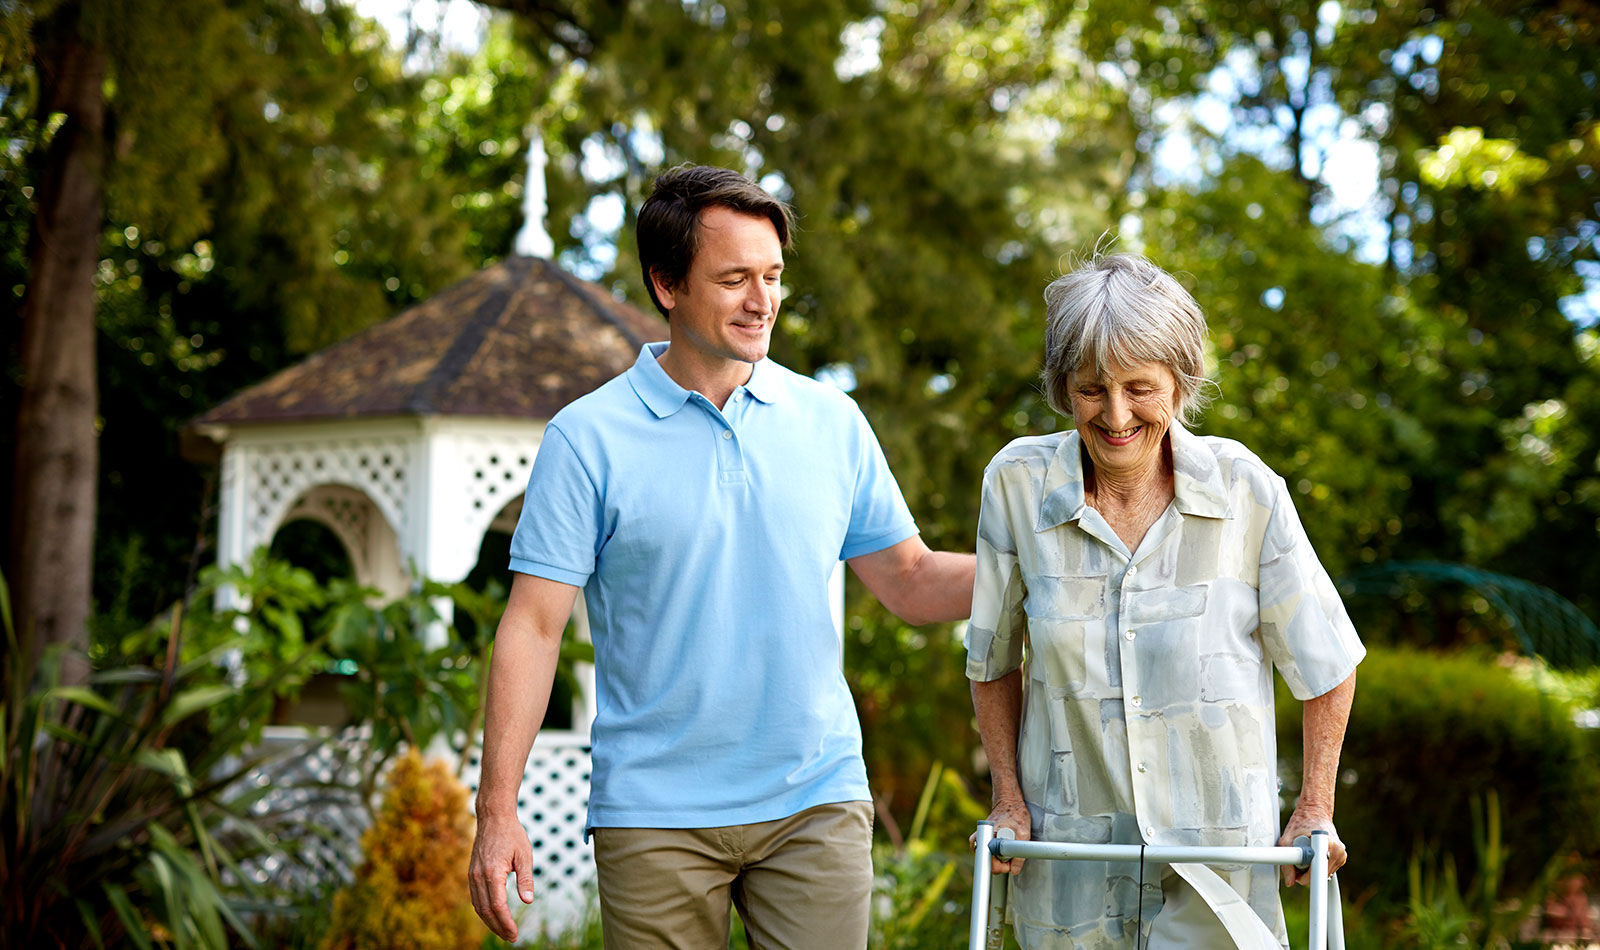 male caregiver walking with senior woman who is using an assistive walking device